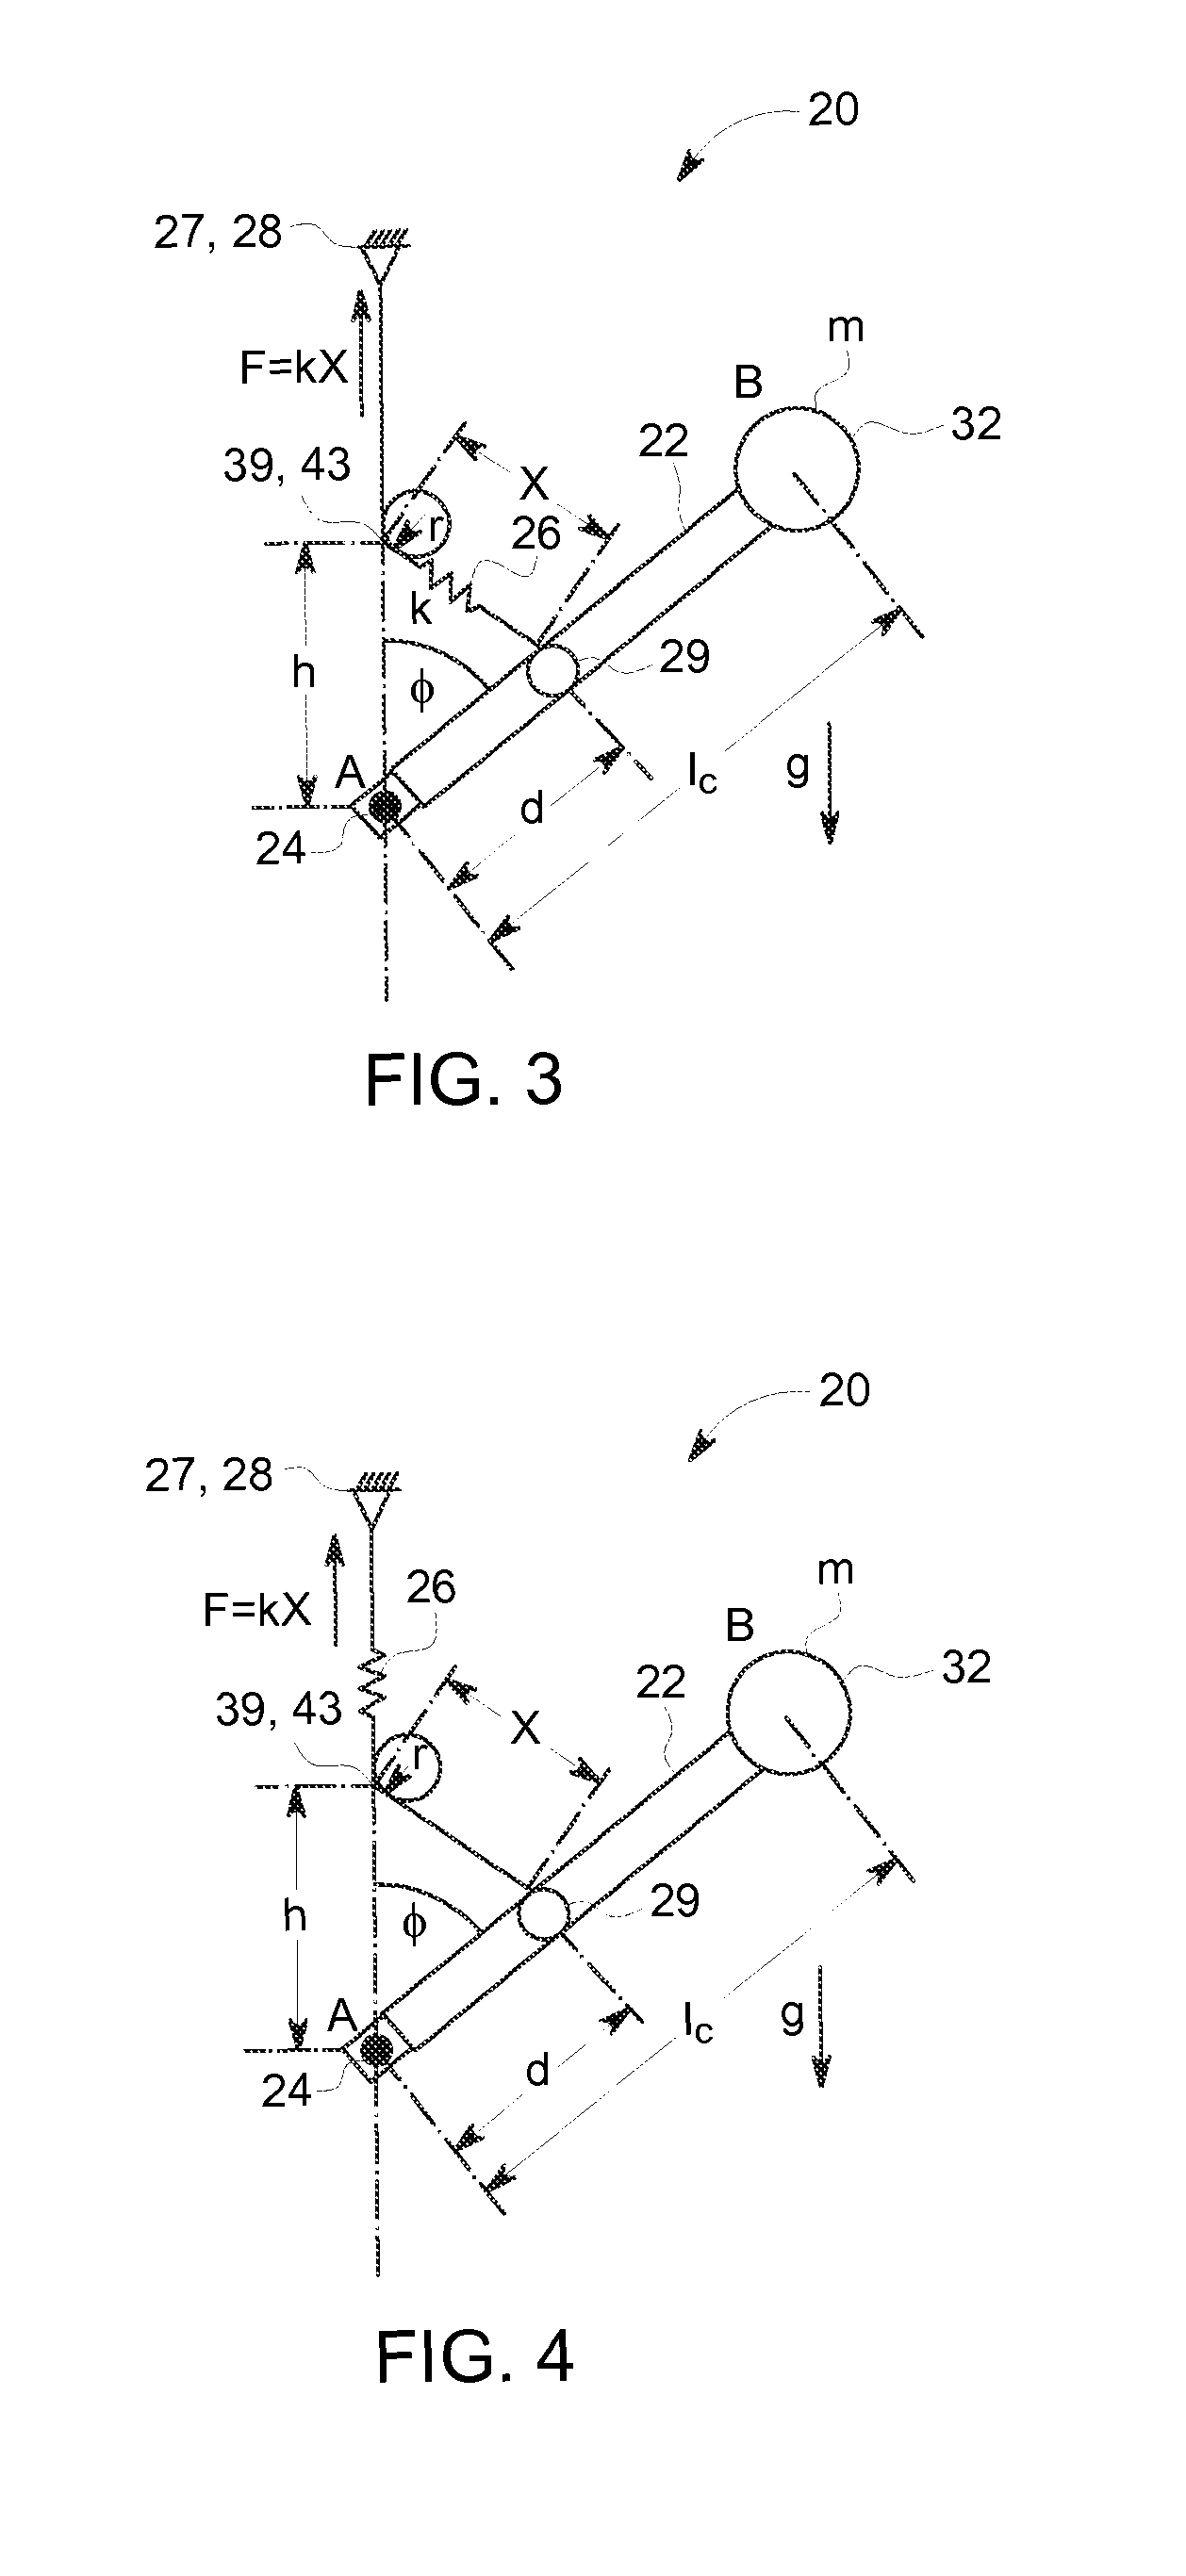 Apparatus for counterbalancing a rotating arm in an imaging system